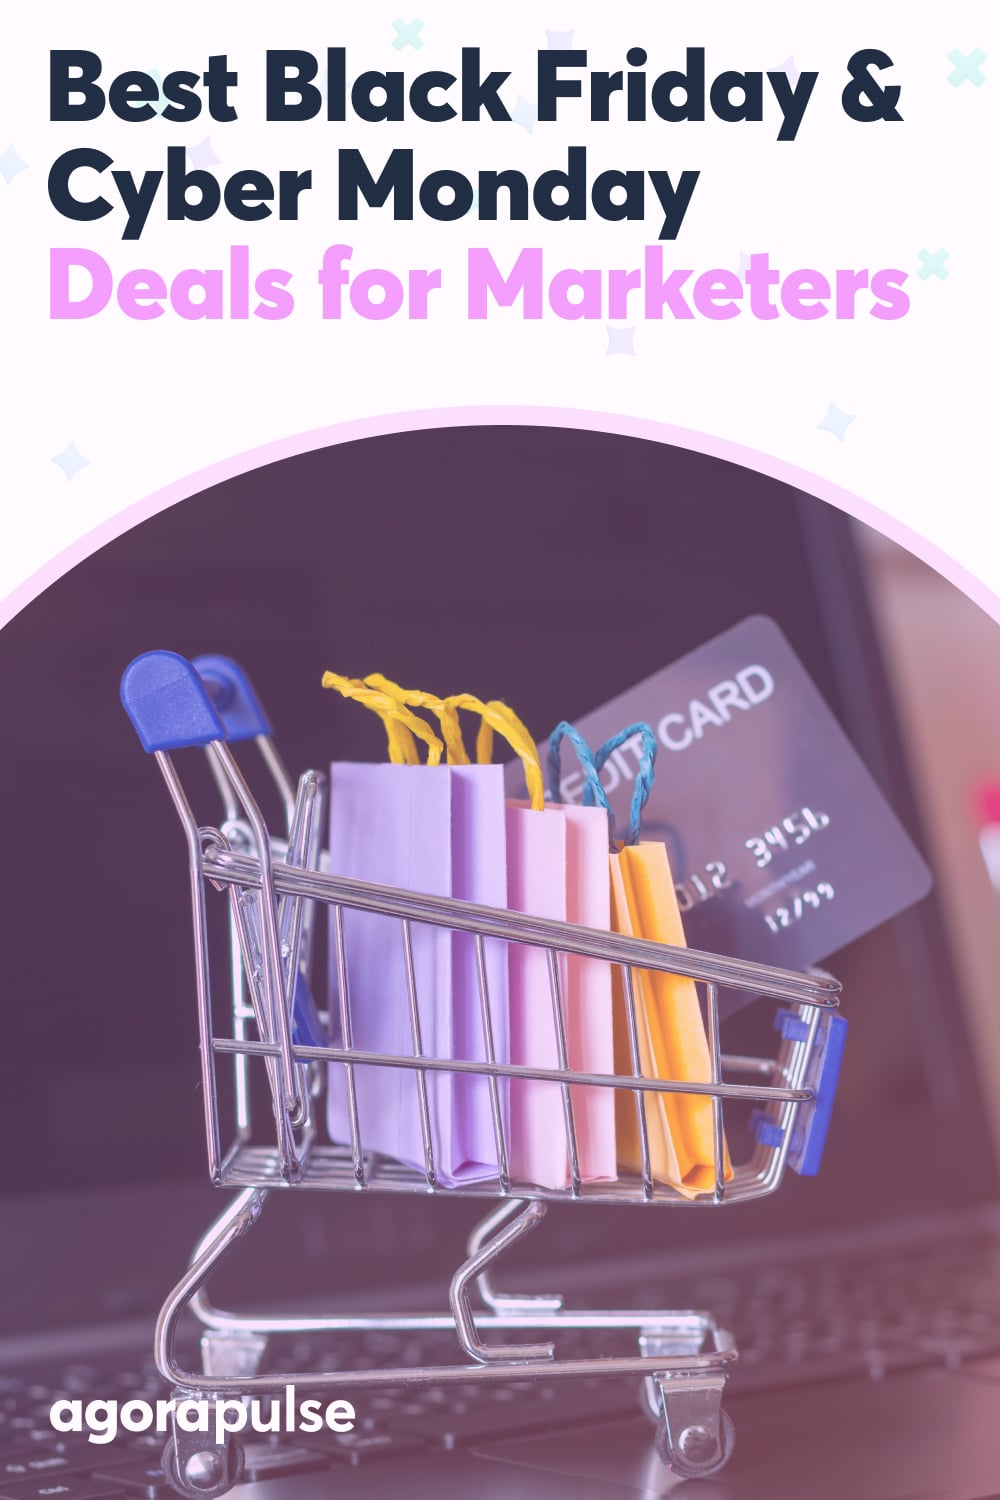 Best Black Friday & Cyber Monday Deals for Marketers